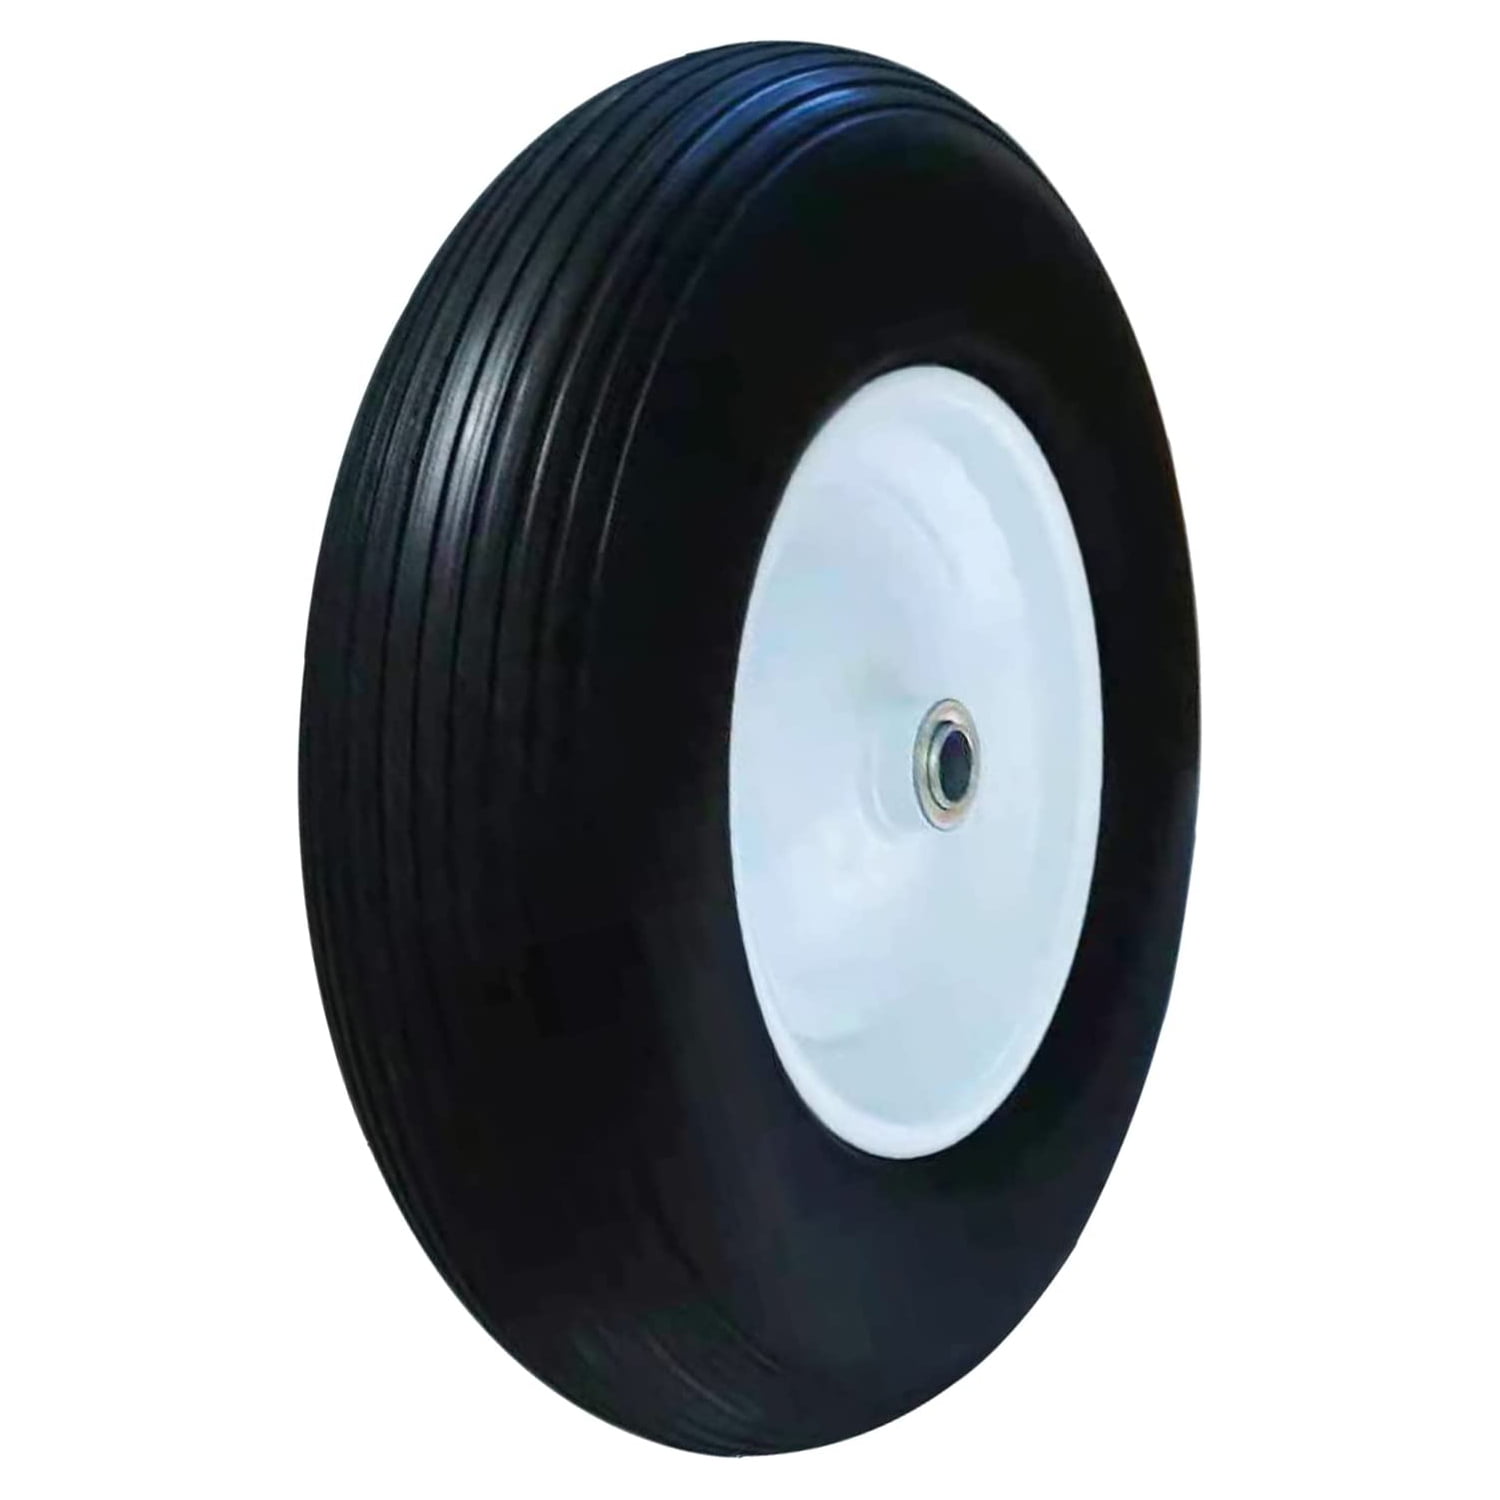 4.80/4.00-8 Pneumatic Wheelbarrow Wheel and Tires with 2 Center Hub and  5/8 Bearings, 4.80 4.00-8 Tire and Wheels for Wheelbarrow and Yard Cart